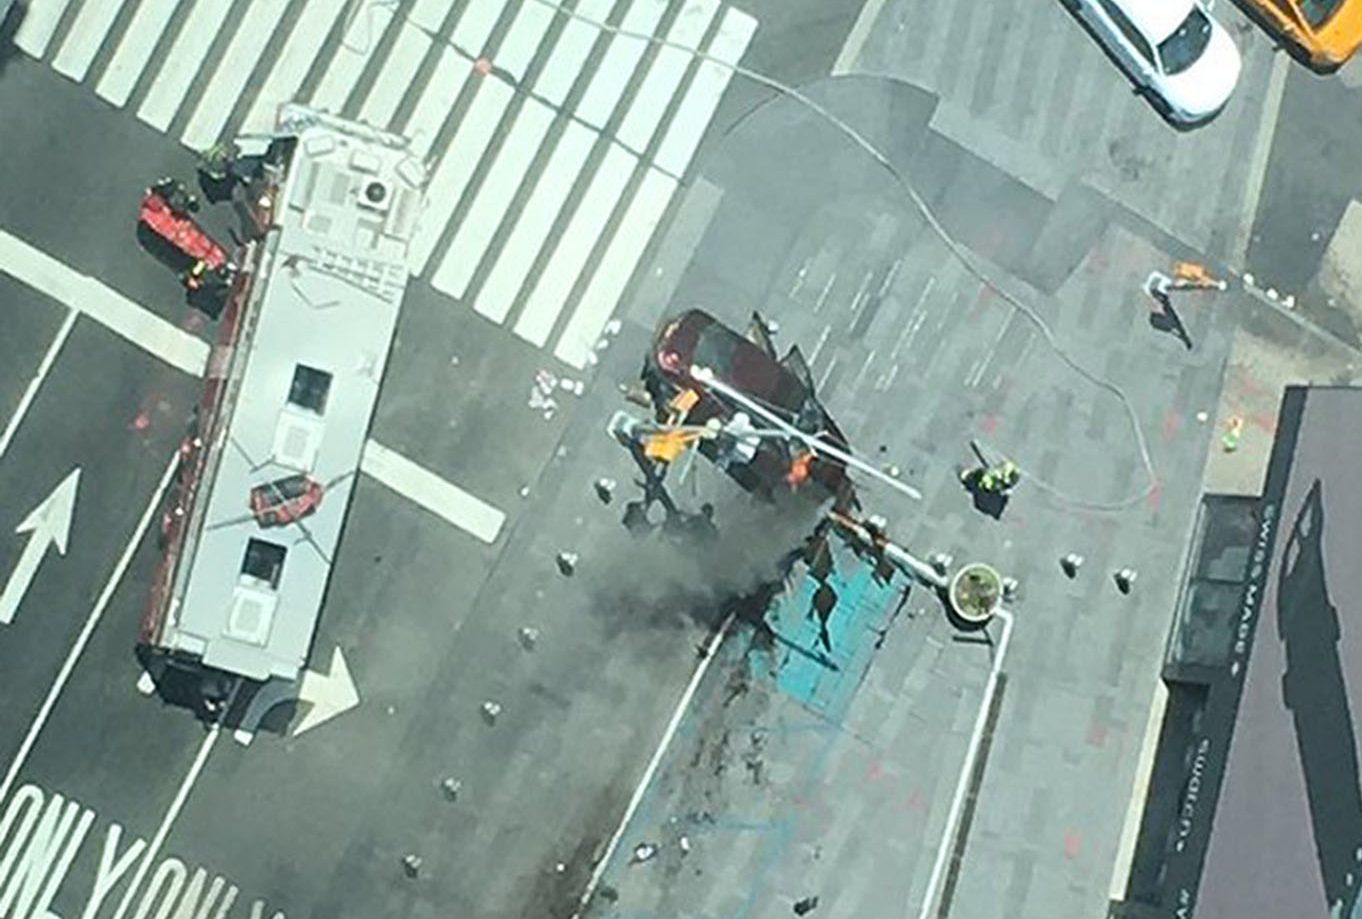 Picture taken with permission from the twitter feed of @chrisreinder of the incident in Times Square, New York, USA.